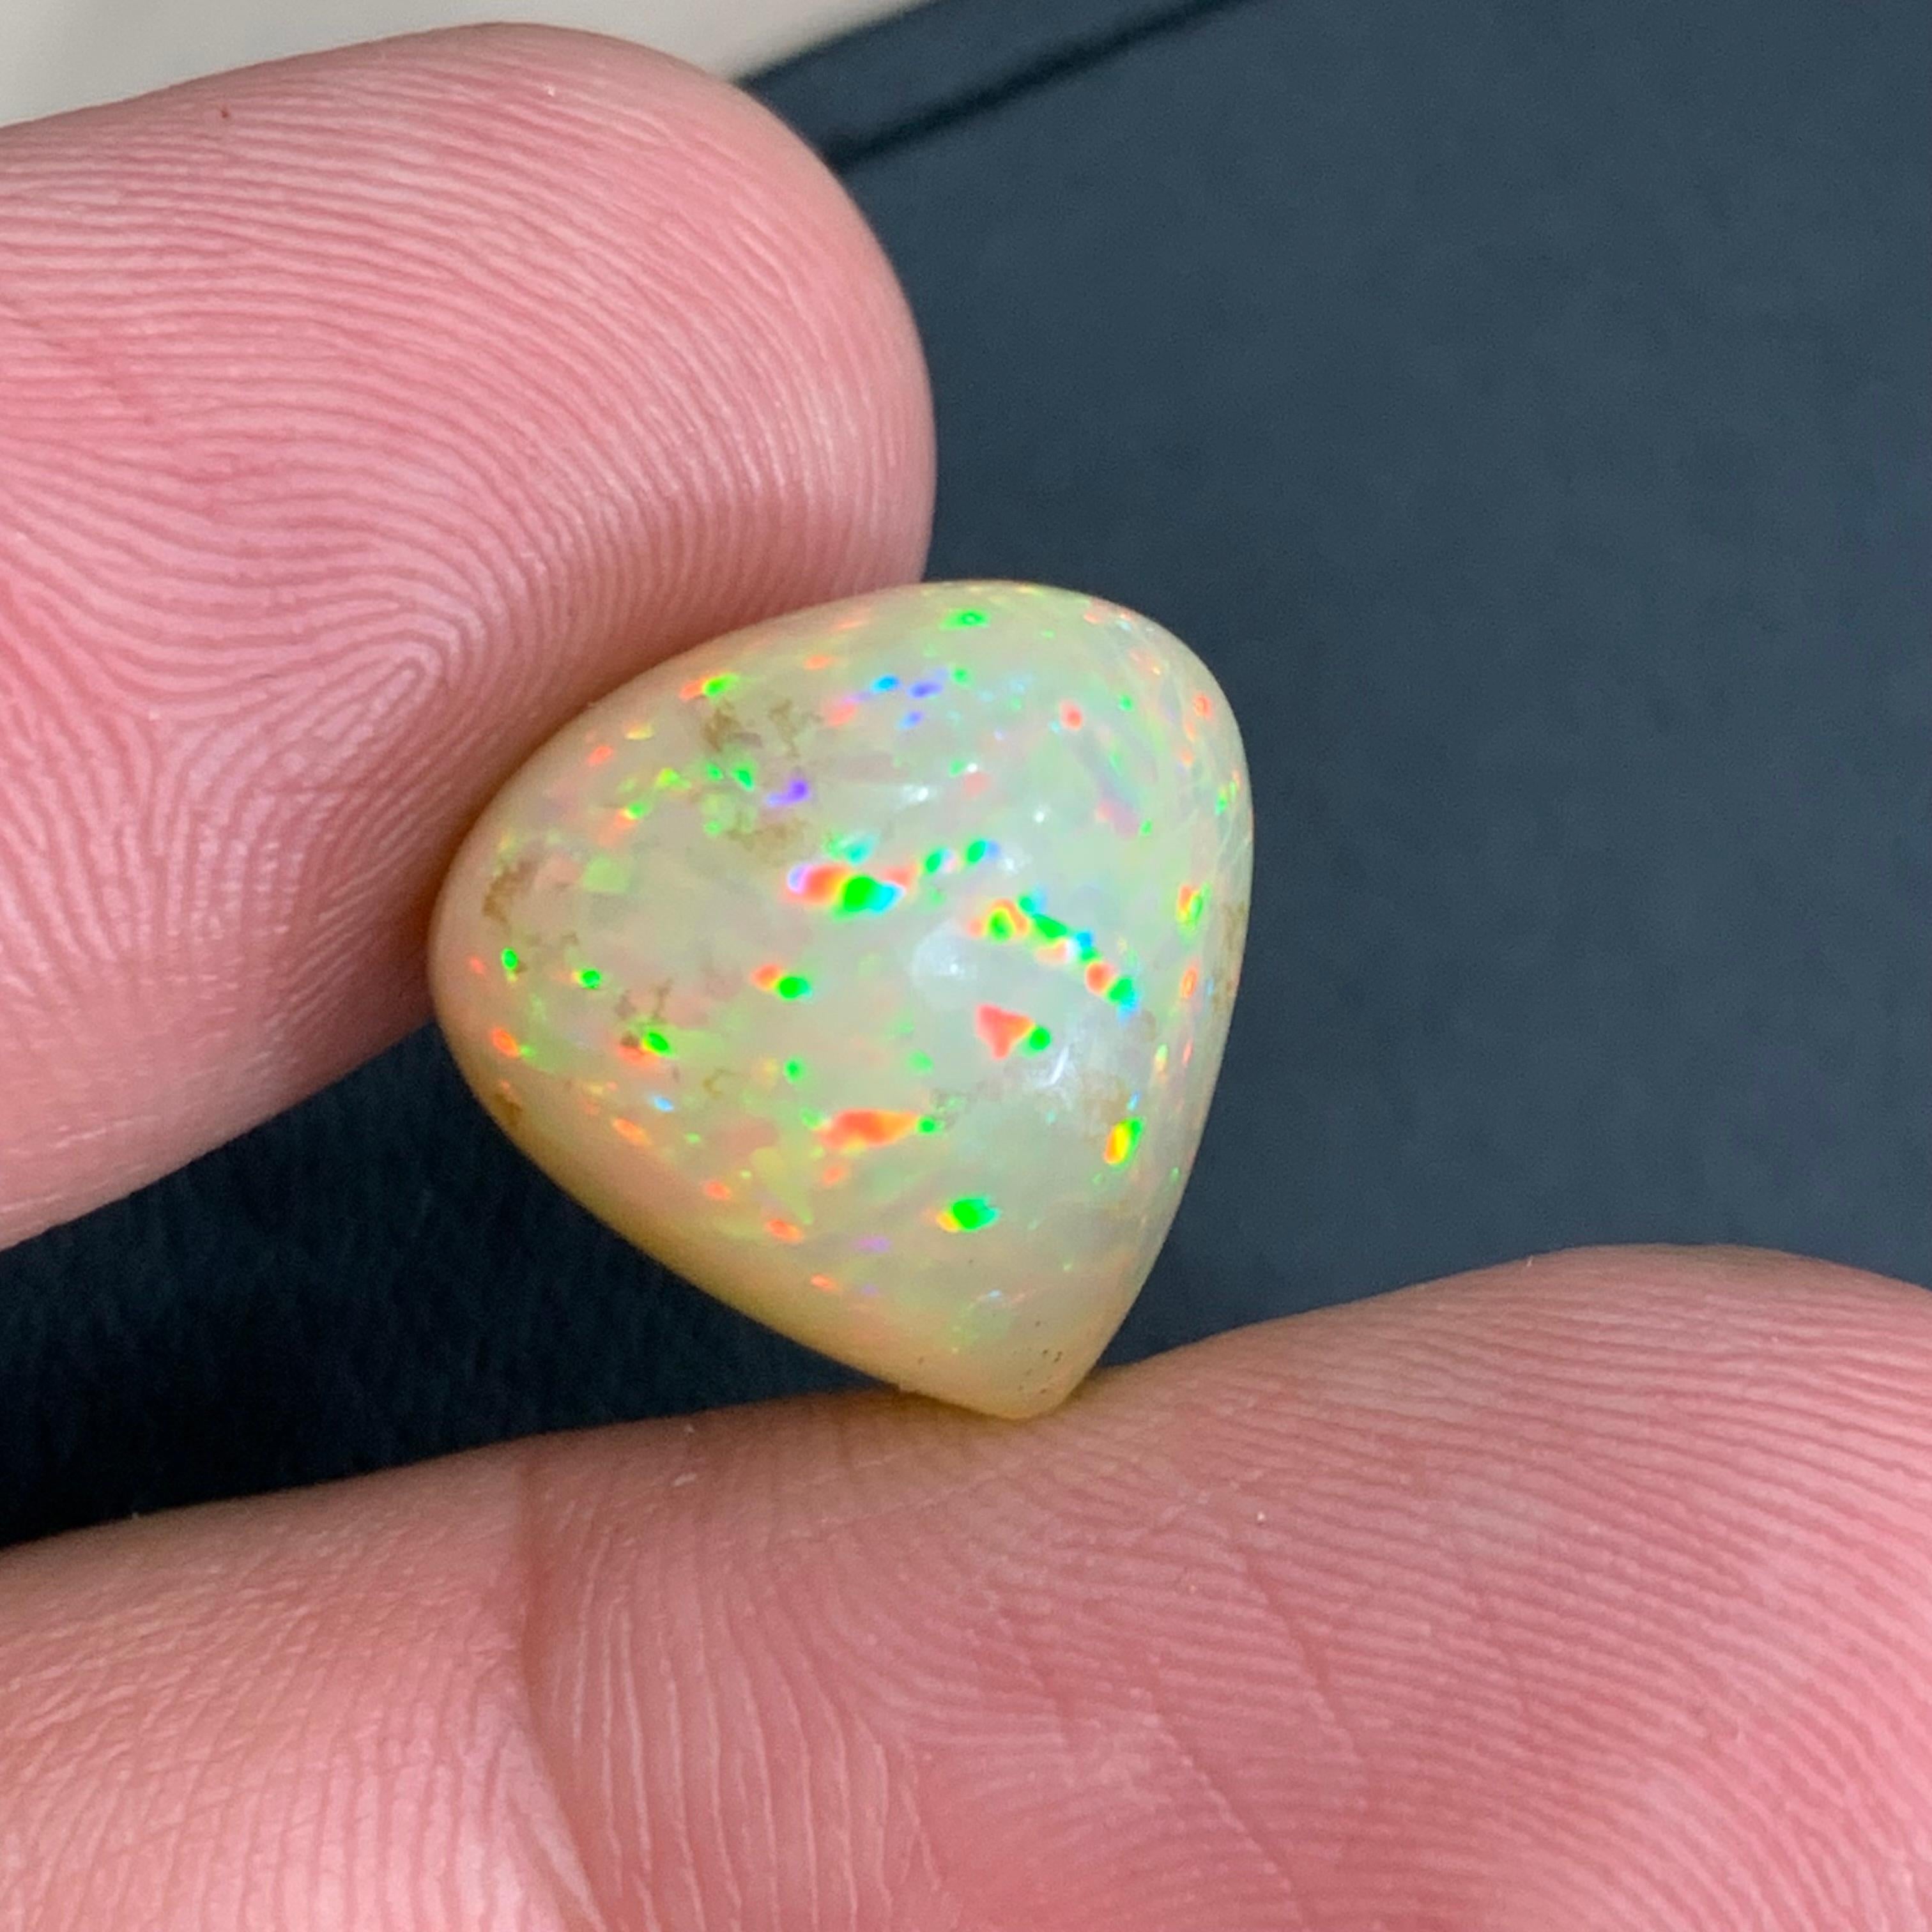 GEMSTONE TYPE: Opal
PIECE(S): 1
WEIGHT: 10.90 Carats
SHAPE: Pear
SIZE (MM): 14.87 x 14.77 x 10.24
COLOR: Play of Colors half white orange
CLARITY: Opaque Play of Colors
TREATMENT: None
ORIGIN: Ethiopia 🇪🇹 
CERTIFICATE: On demand
(if you require a